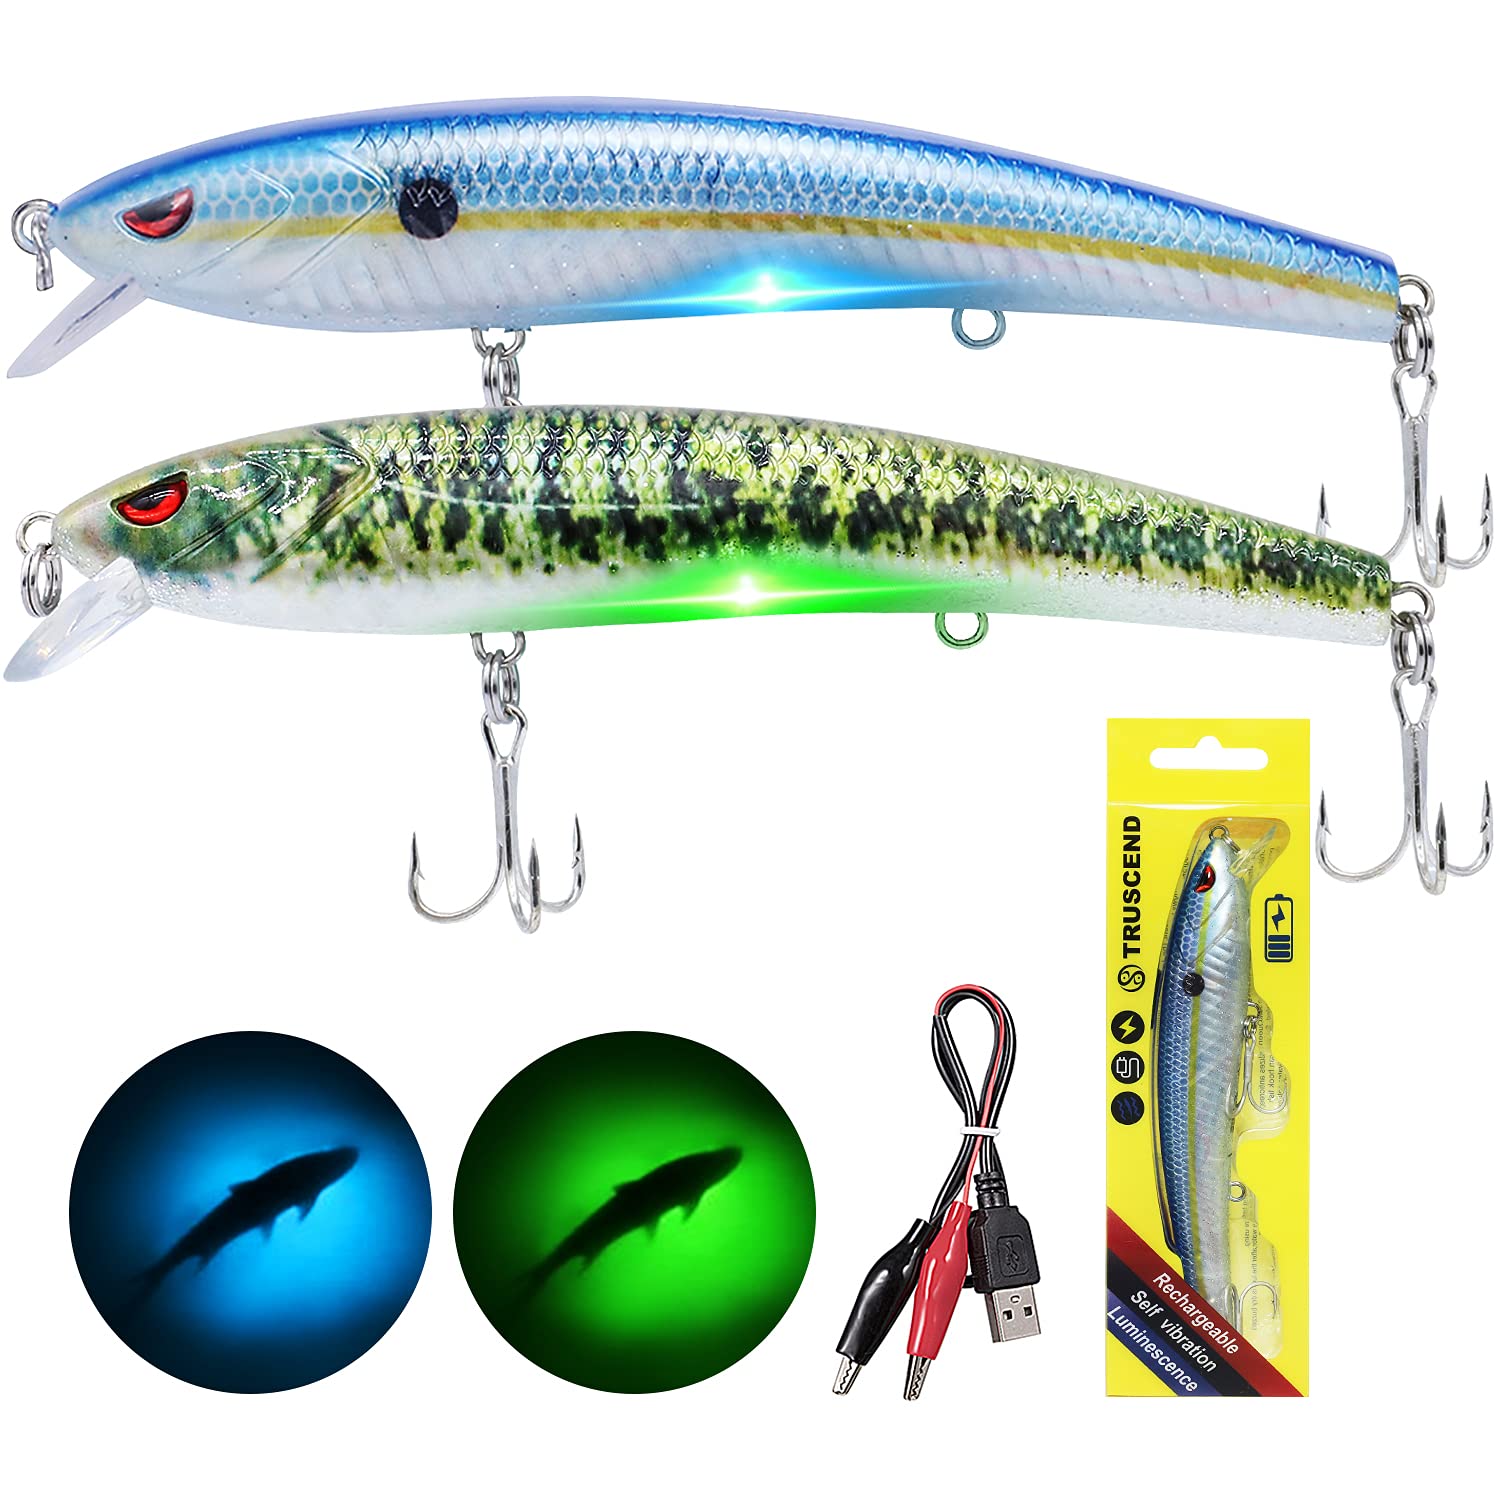 The Rechargeable Fishing Lure That Guaranteed A Strike On Every Cast!  (VIDEO)